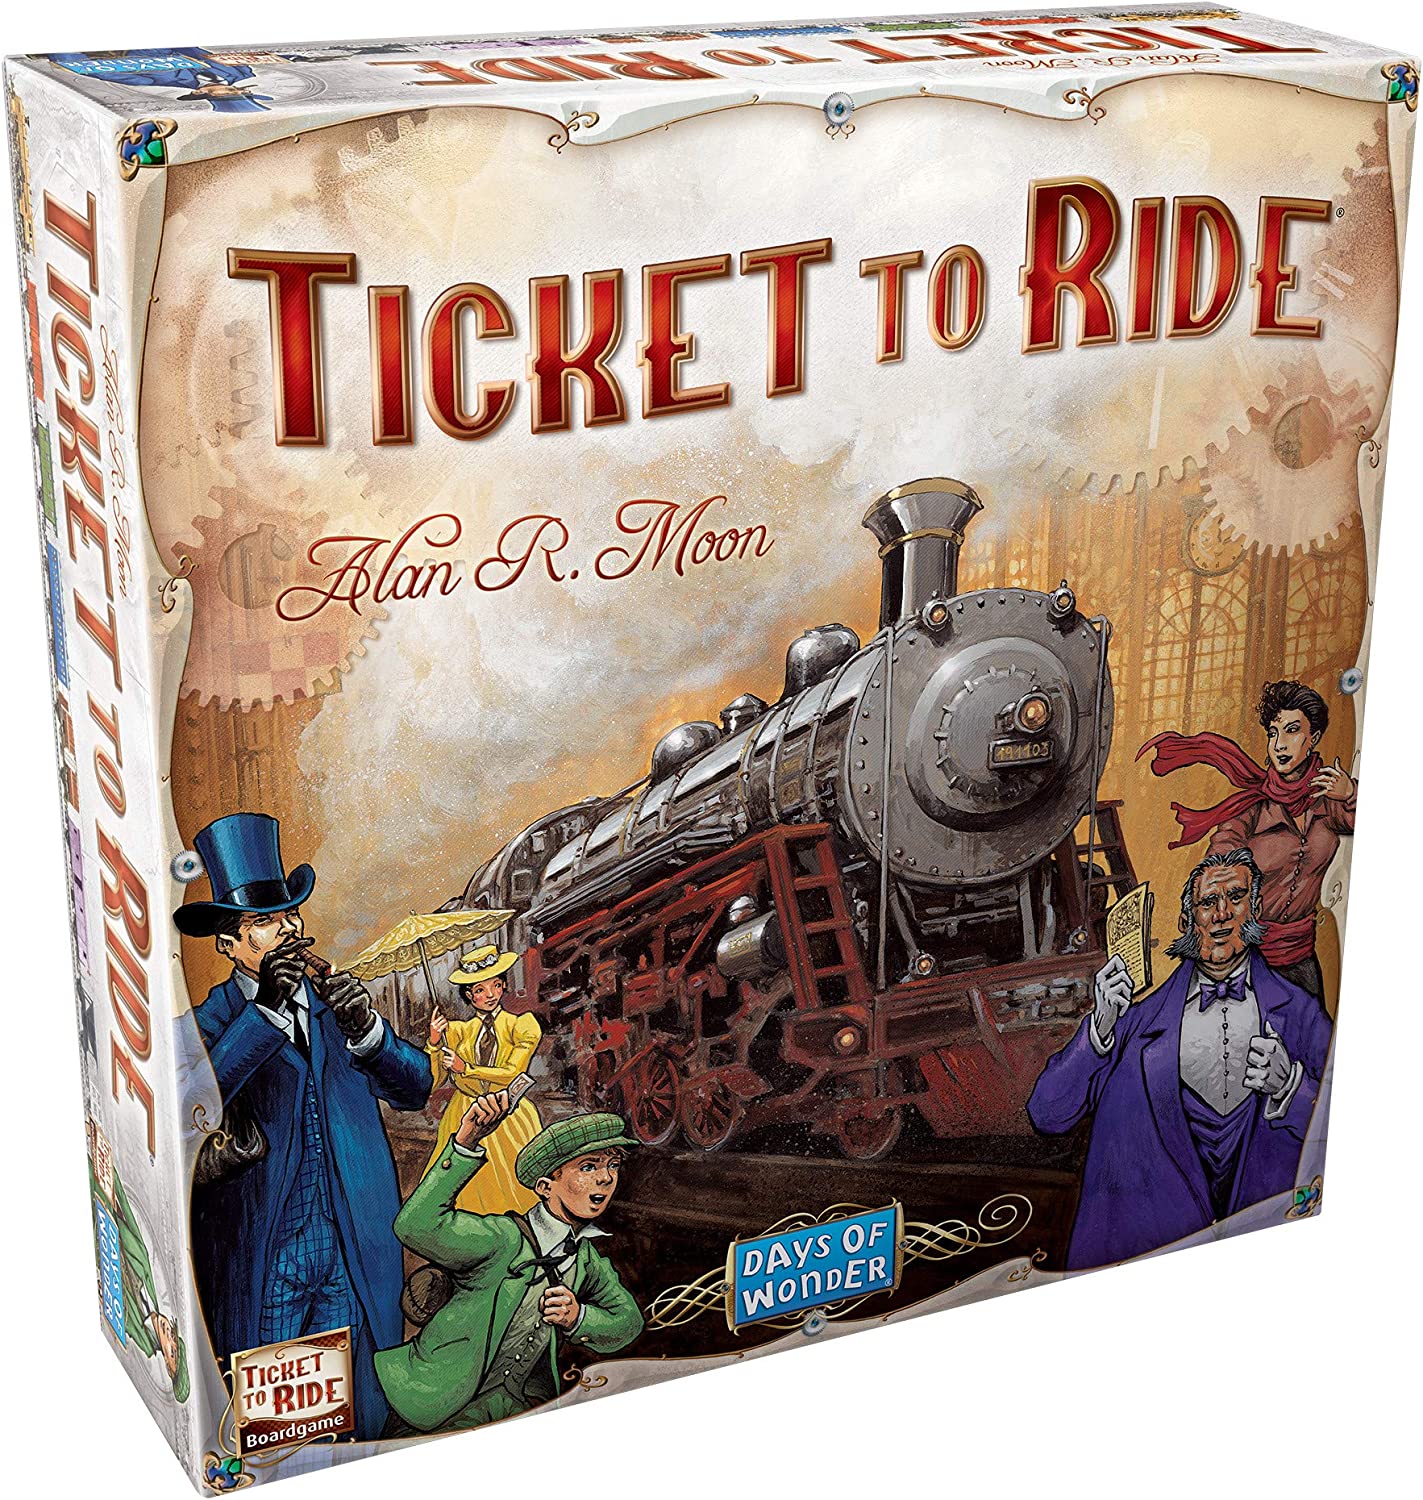 Picture of Ticket to Ride game